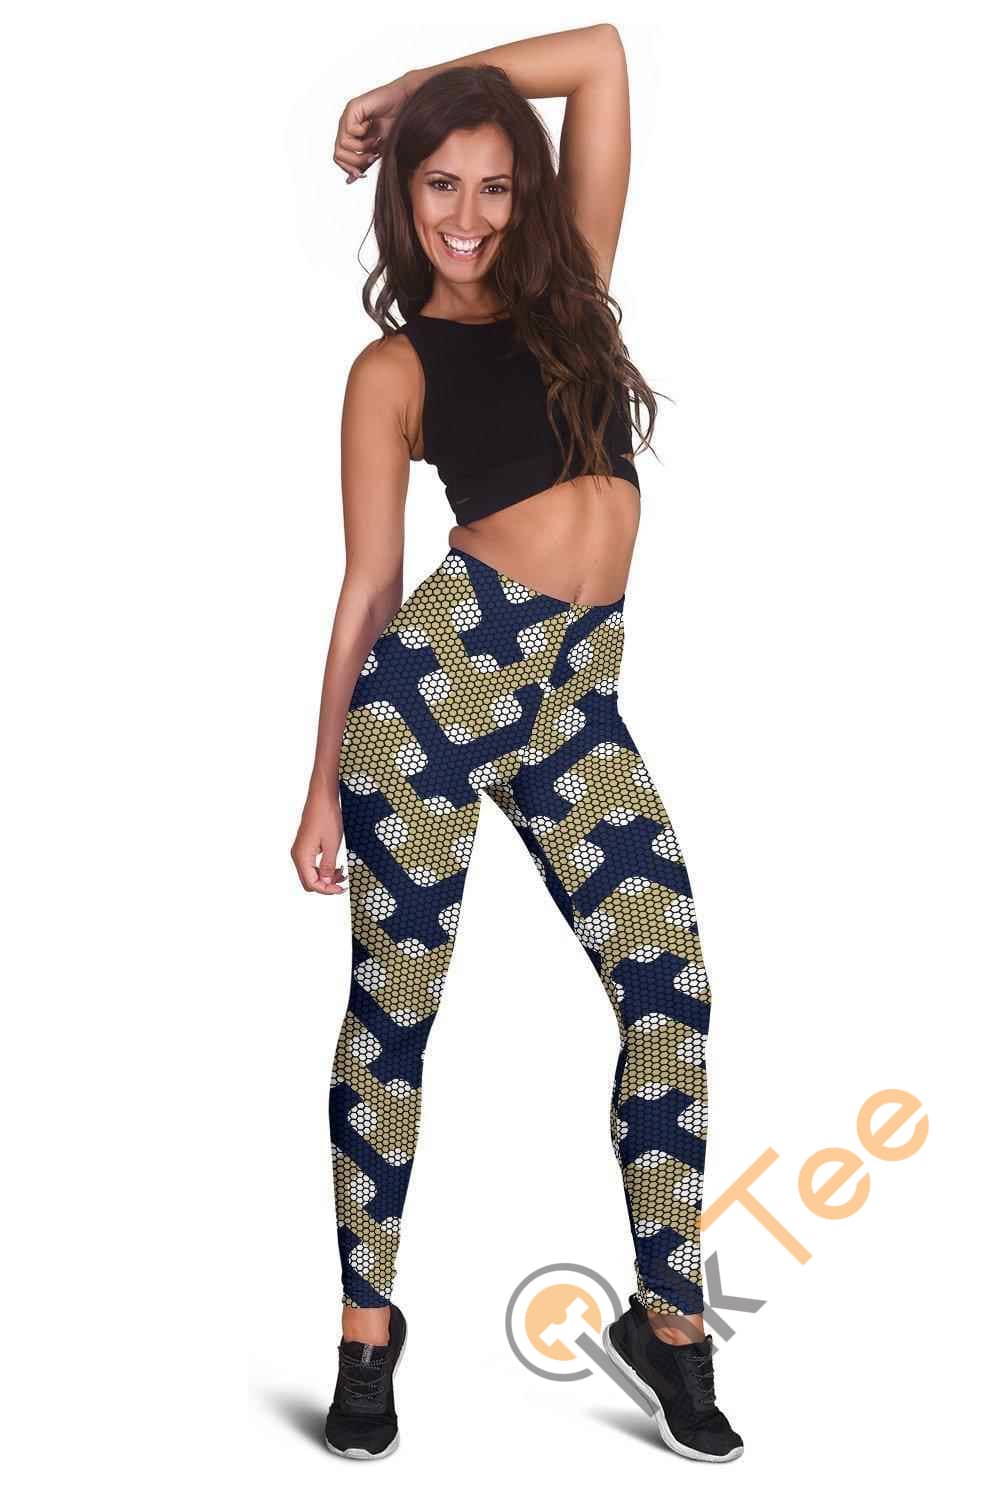 Inktee Store - Pitt Panthers Inspired Liberty 3D All Over Print For Yoga Fitness Fashion Women'S Leggings Image